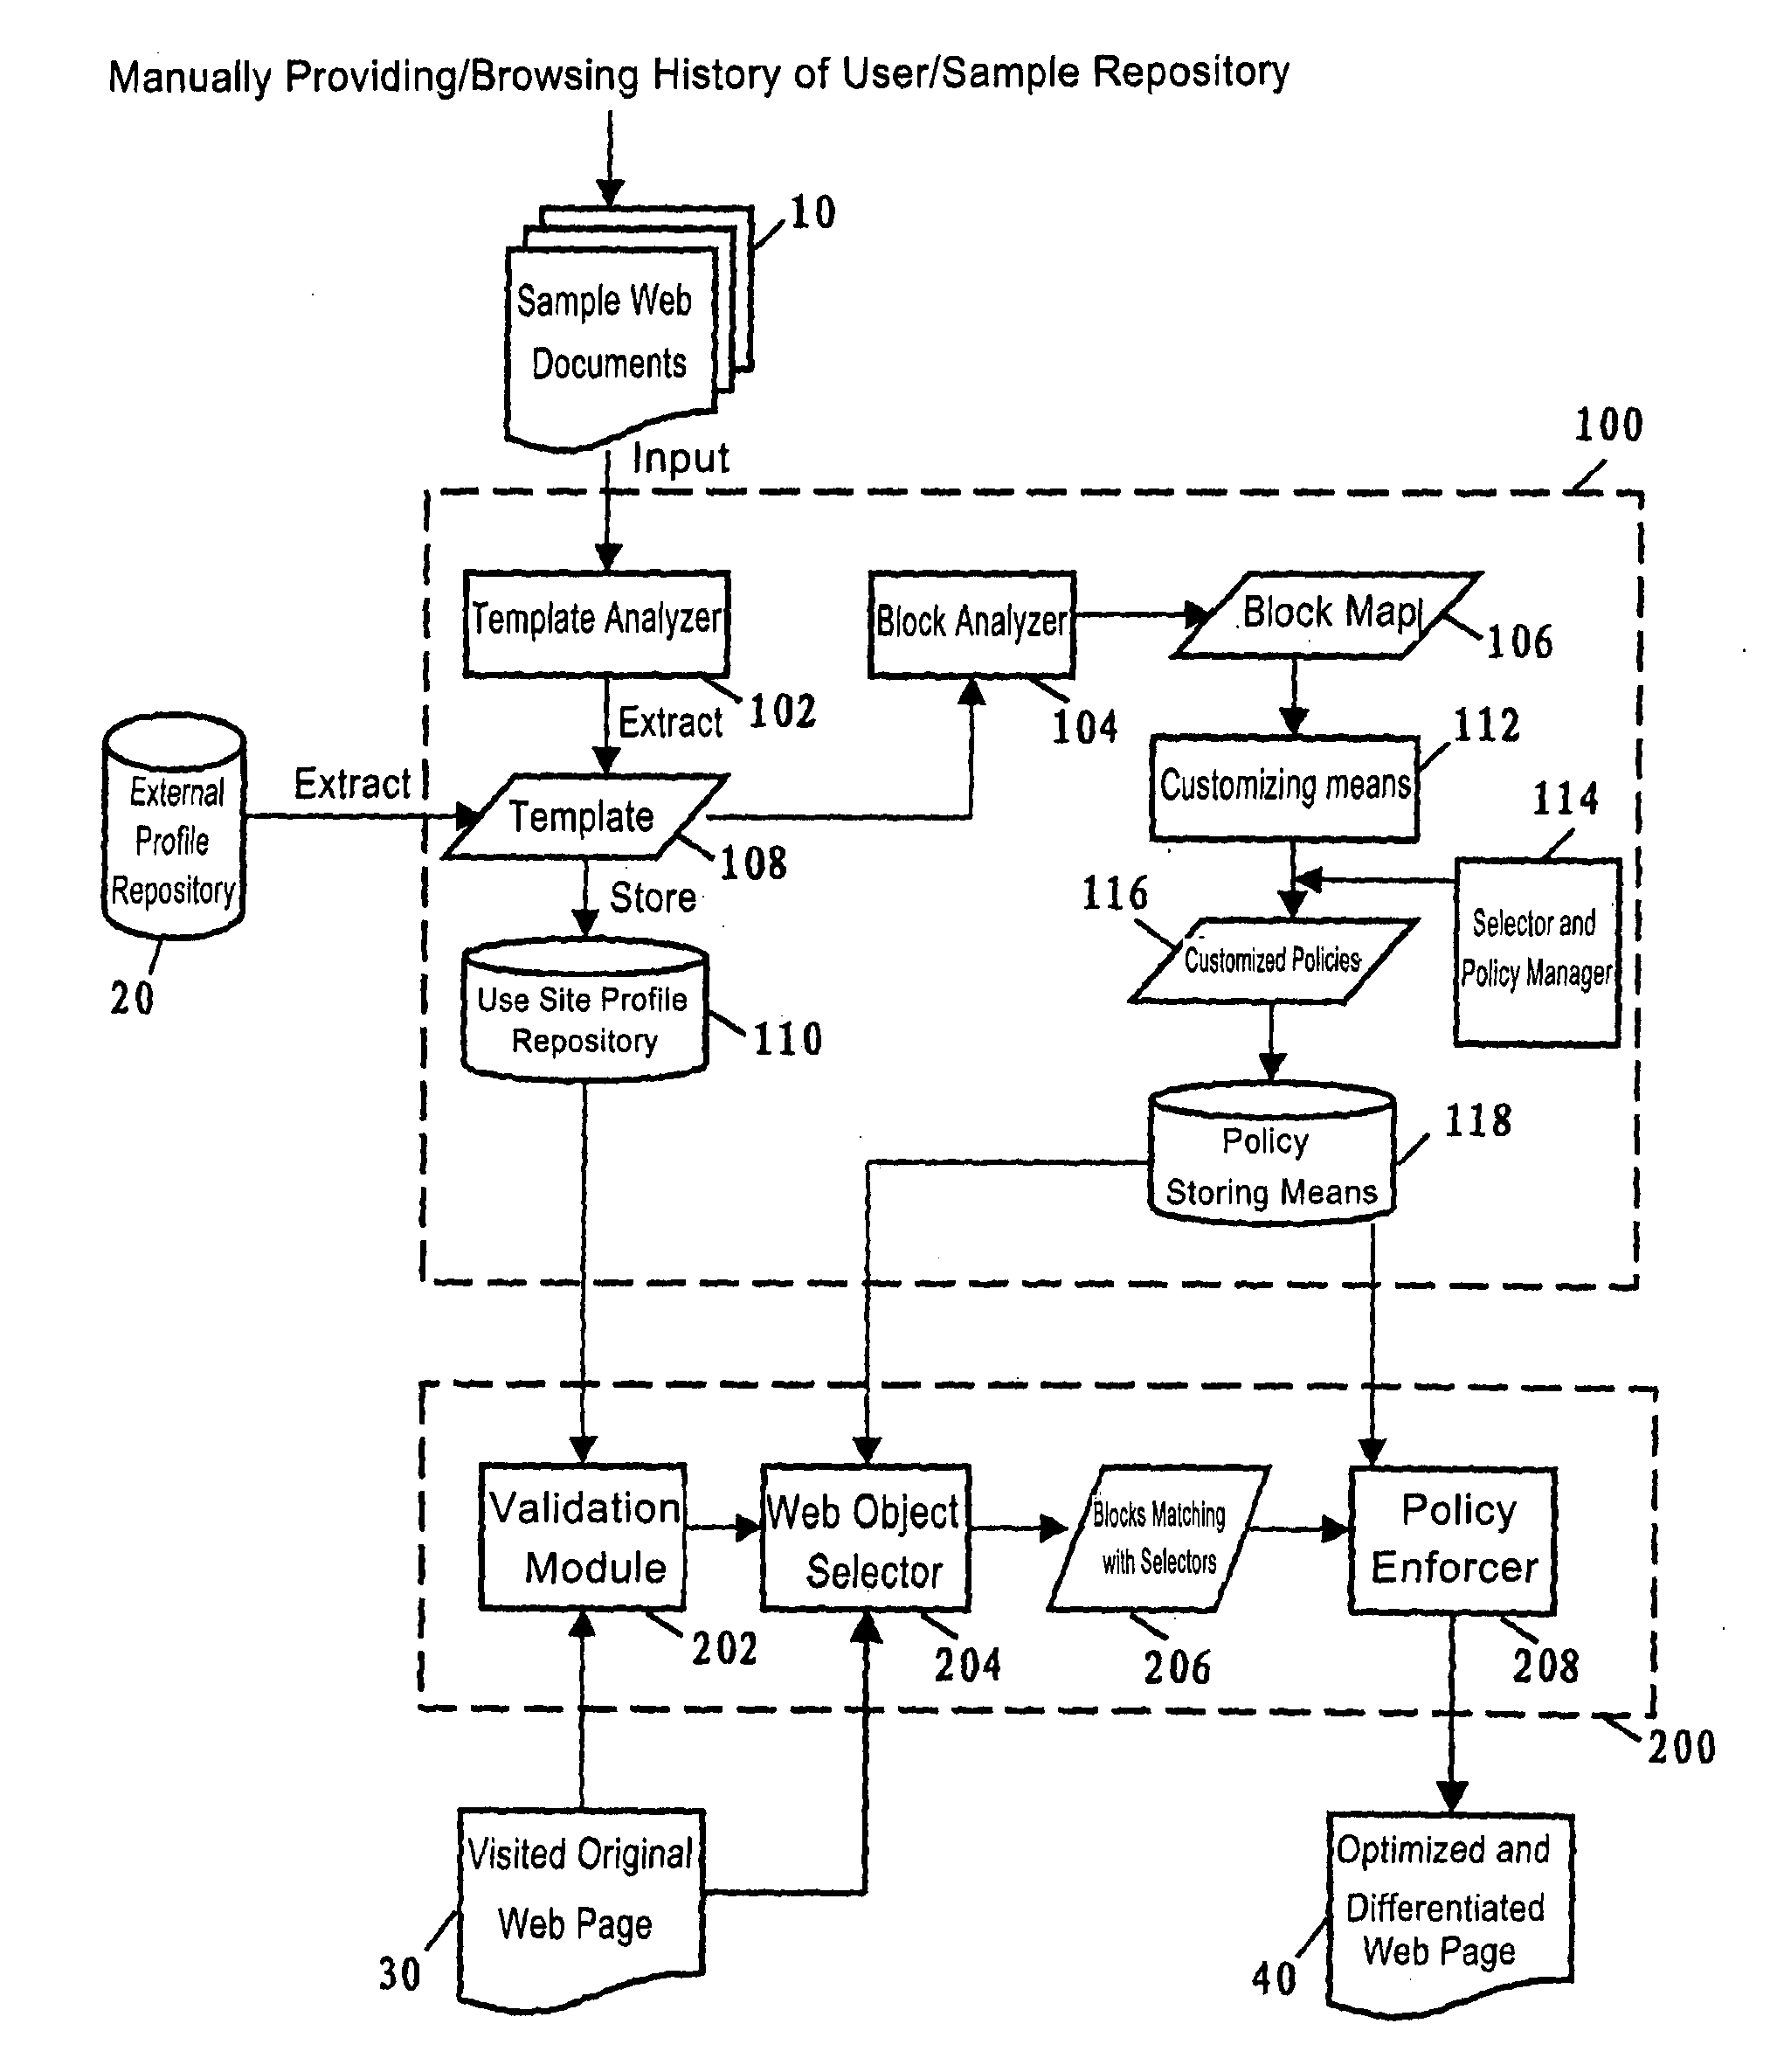 Apparatus and method for optimizing and differentiating web page browsing